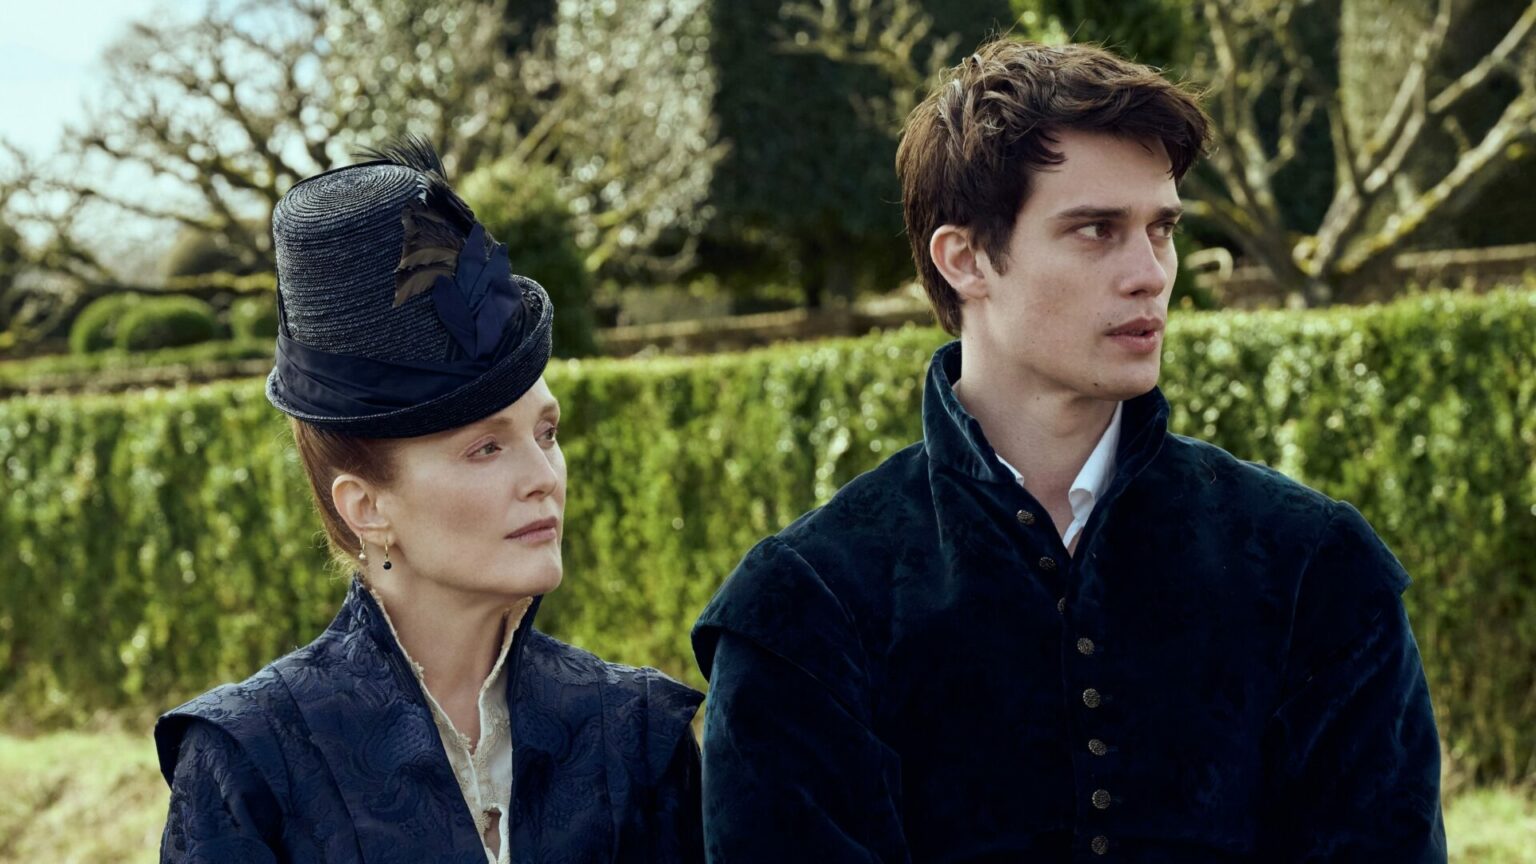 First look images for Mary & featuring Nicholas Galitzine